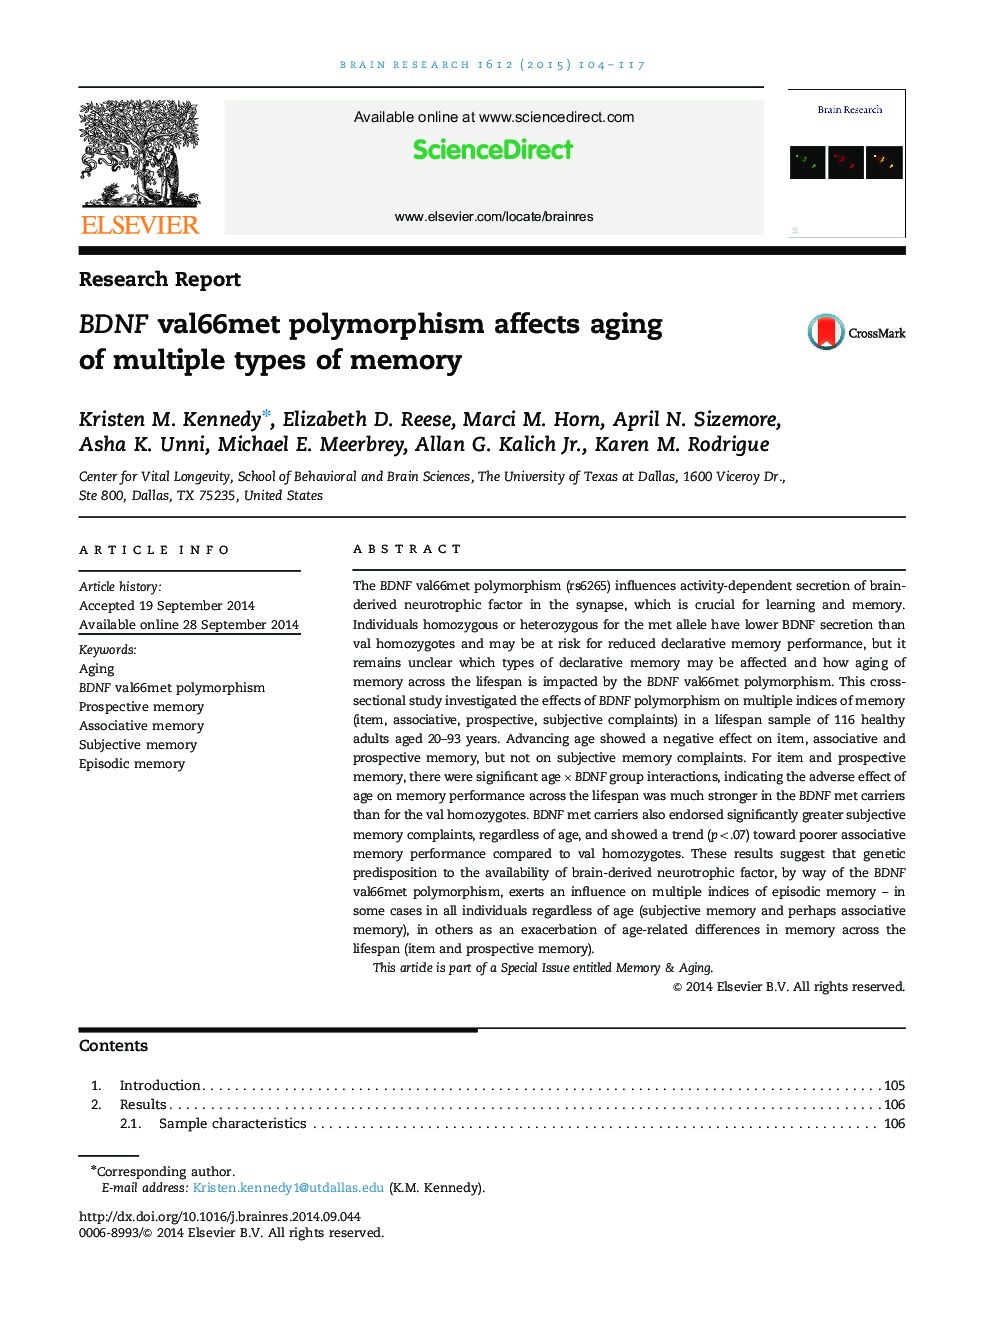 Research ReportBDNF val66met polymorphism affects aging of multiple types of memory